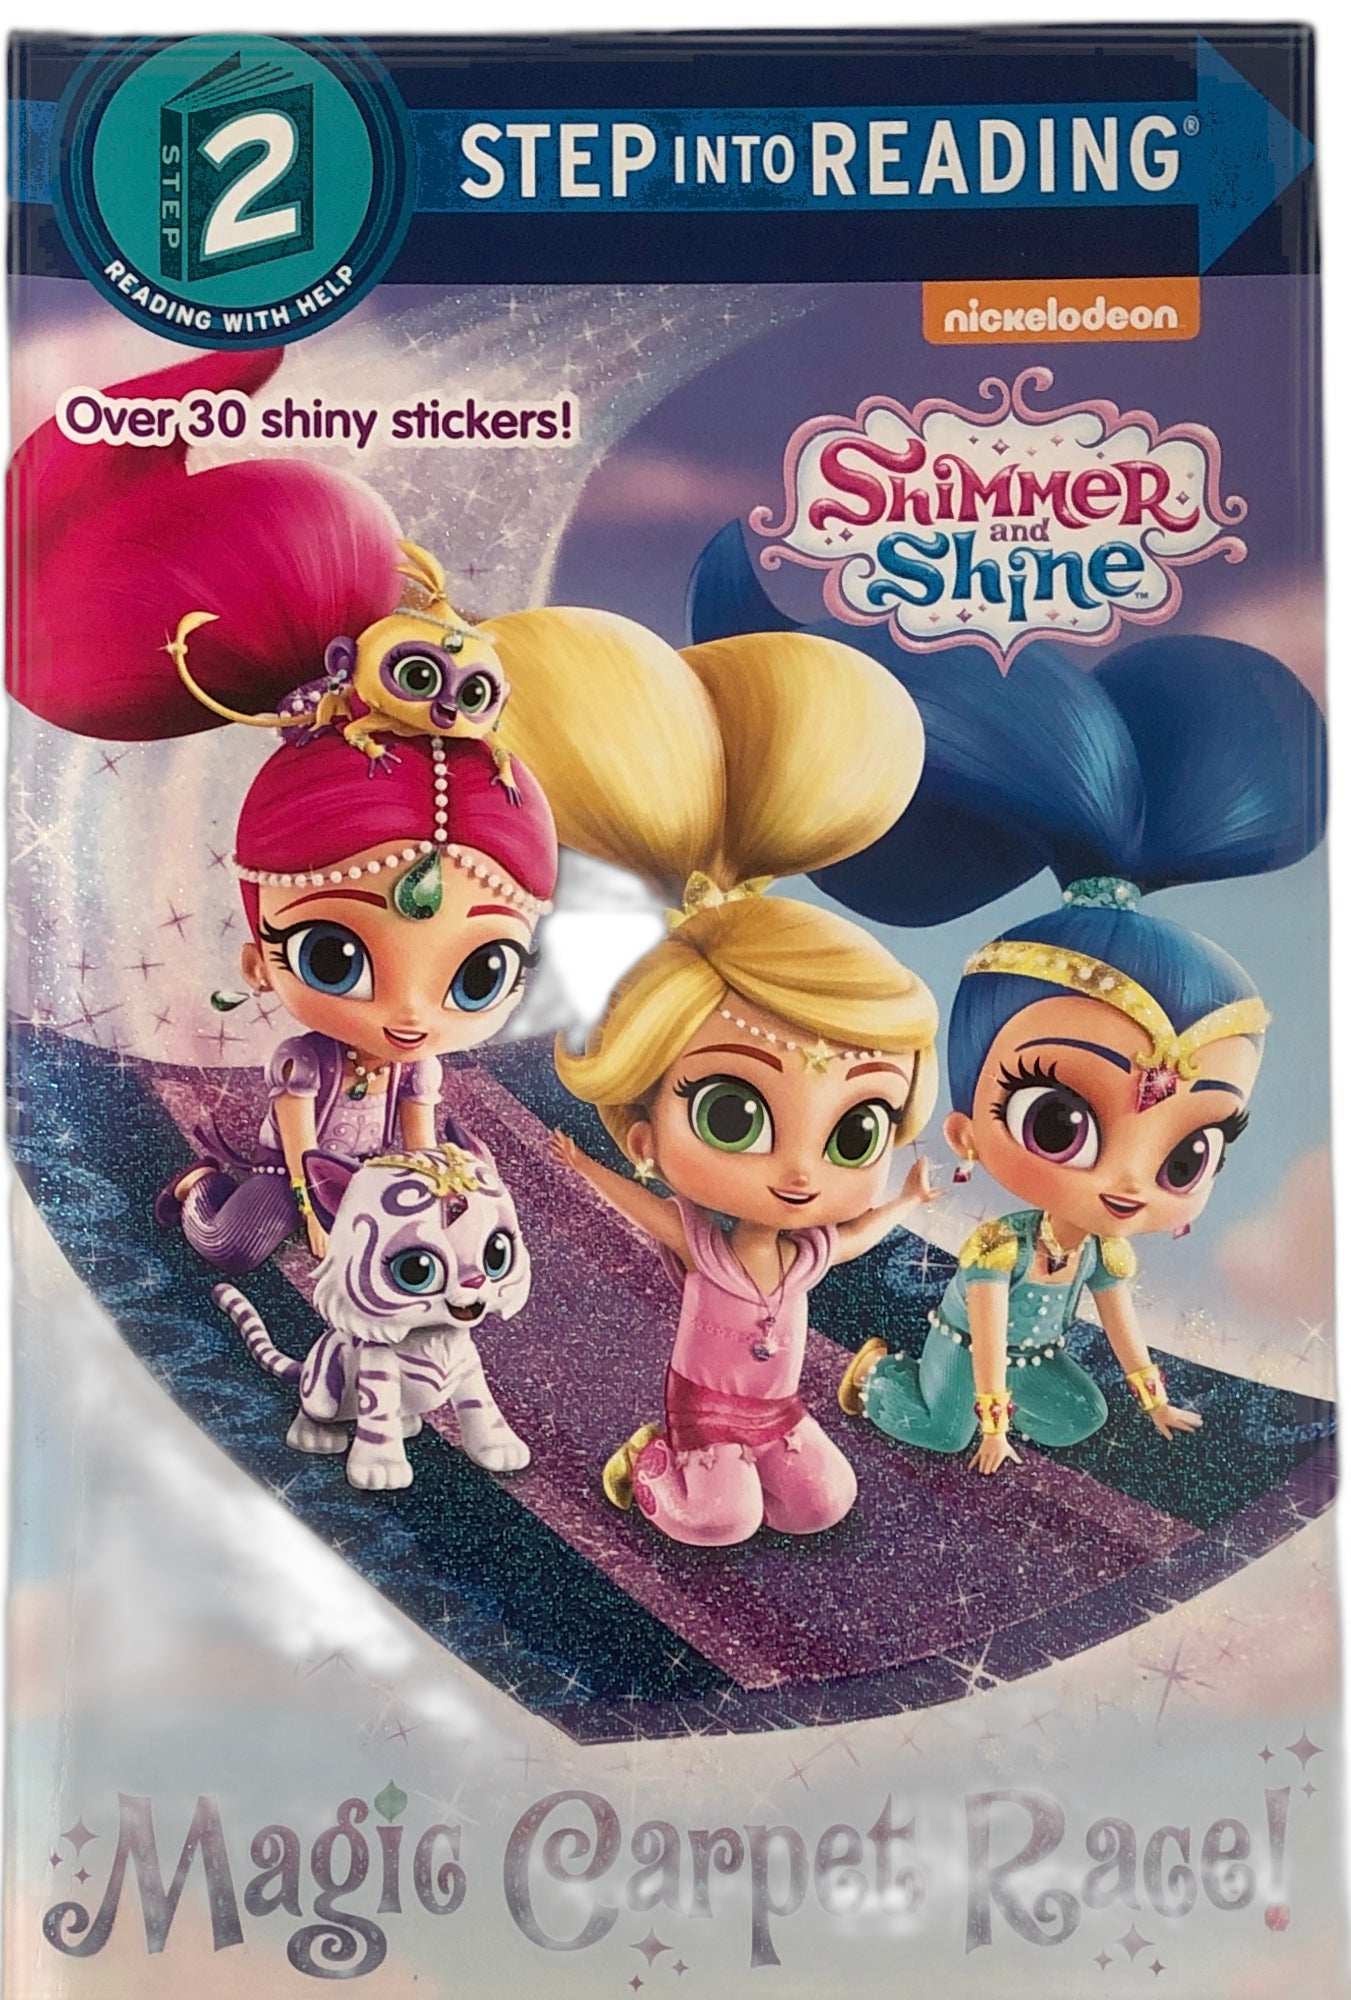 Magic Carpet Race! (Shimmer and Shine) (Step into Reading) by Delphine Finnegan